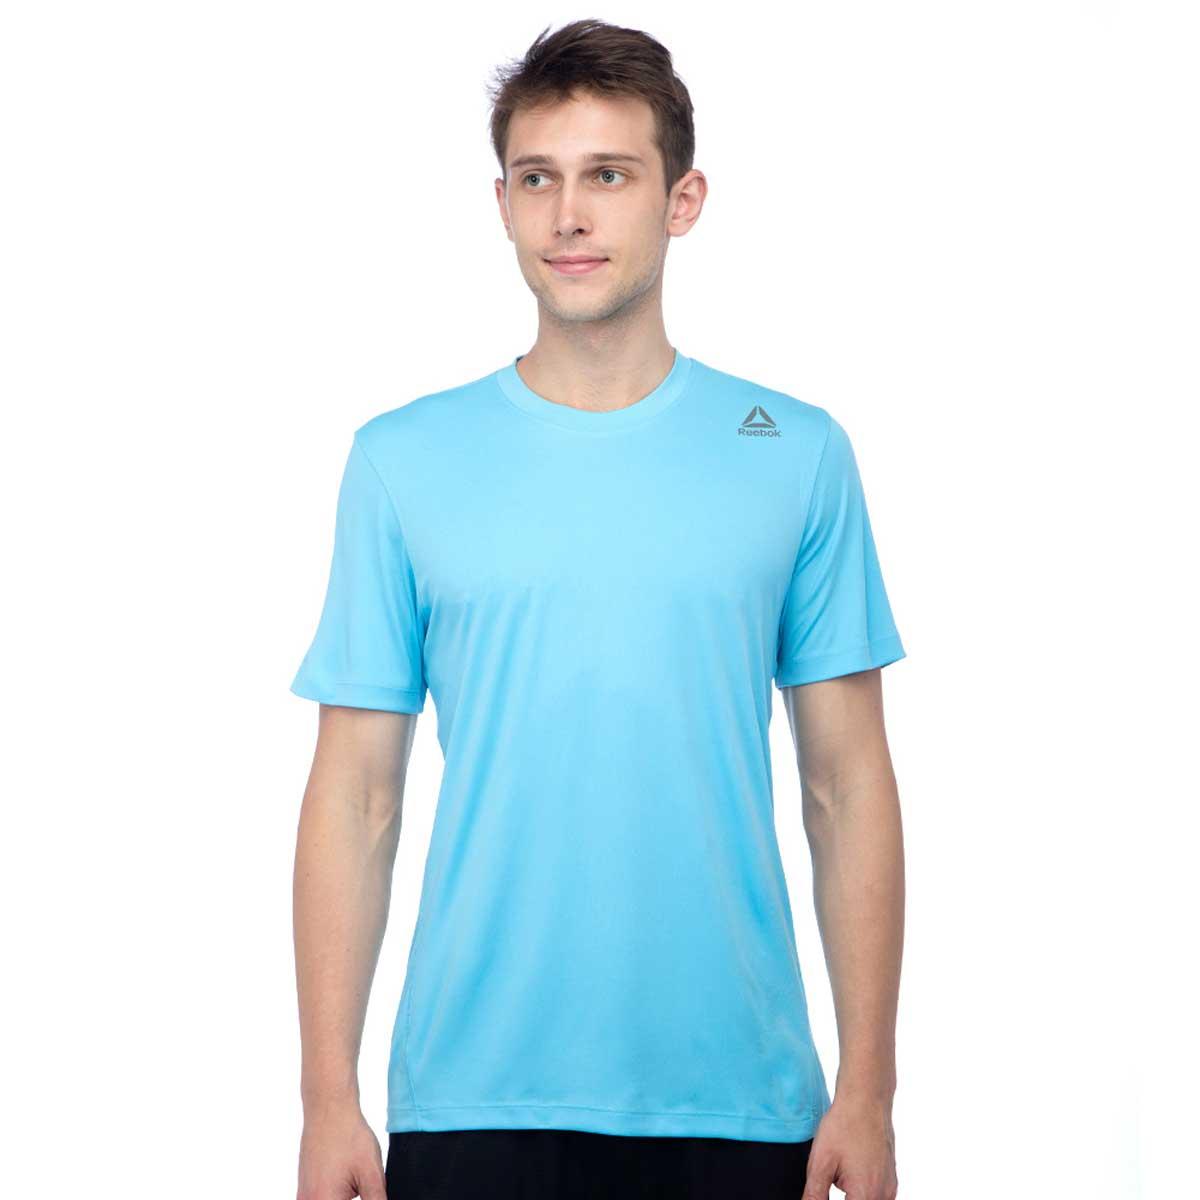 Buy Reebok Mens Round Neck T-Shirts (Blue) Online at Lowest Price in India